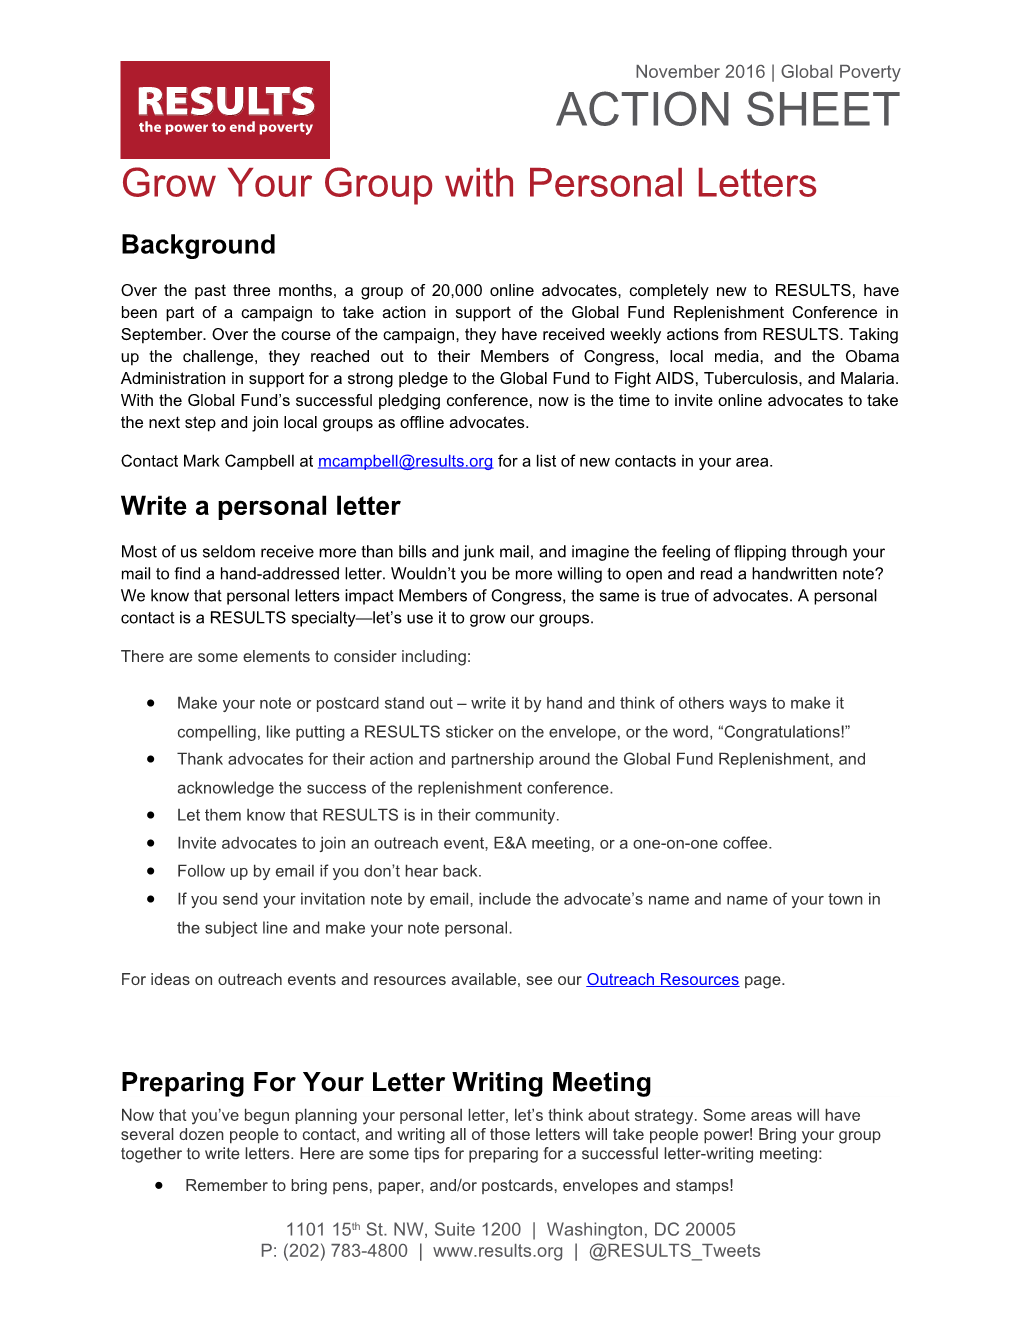 Grow Your Group with Personal Letters